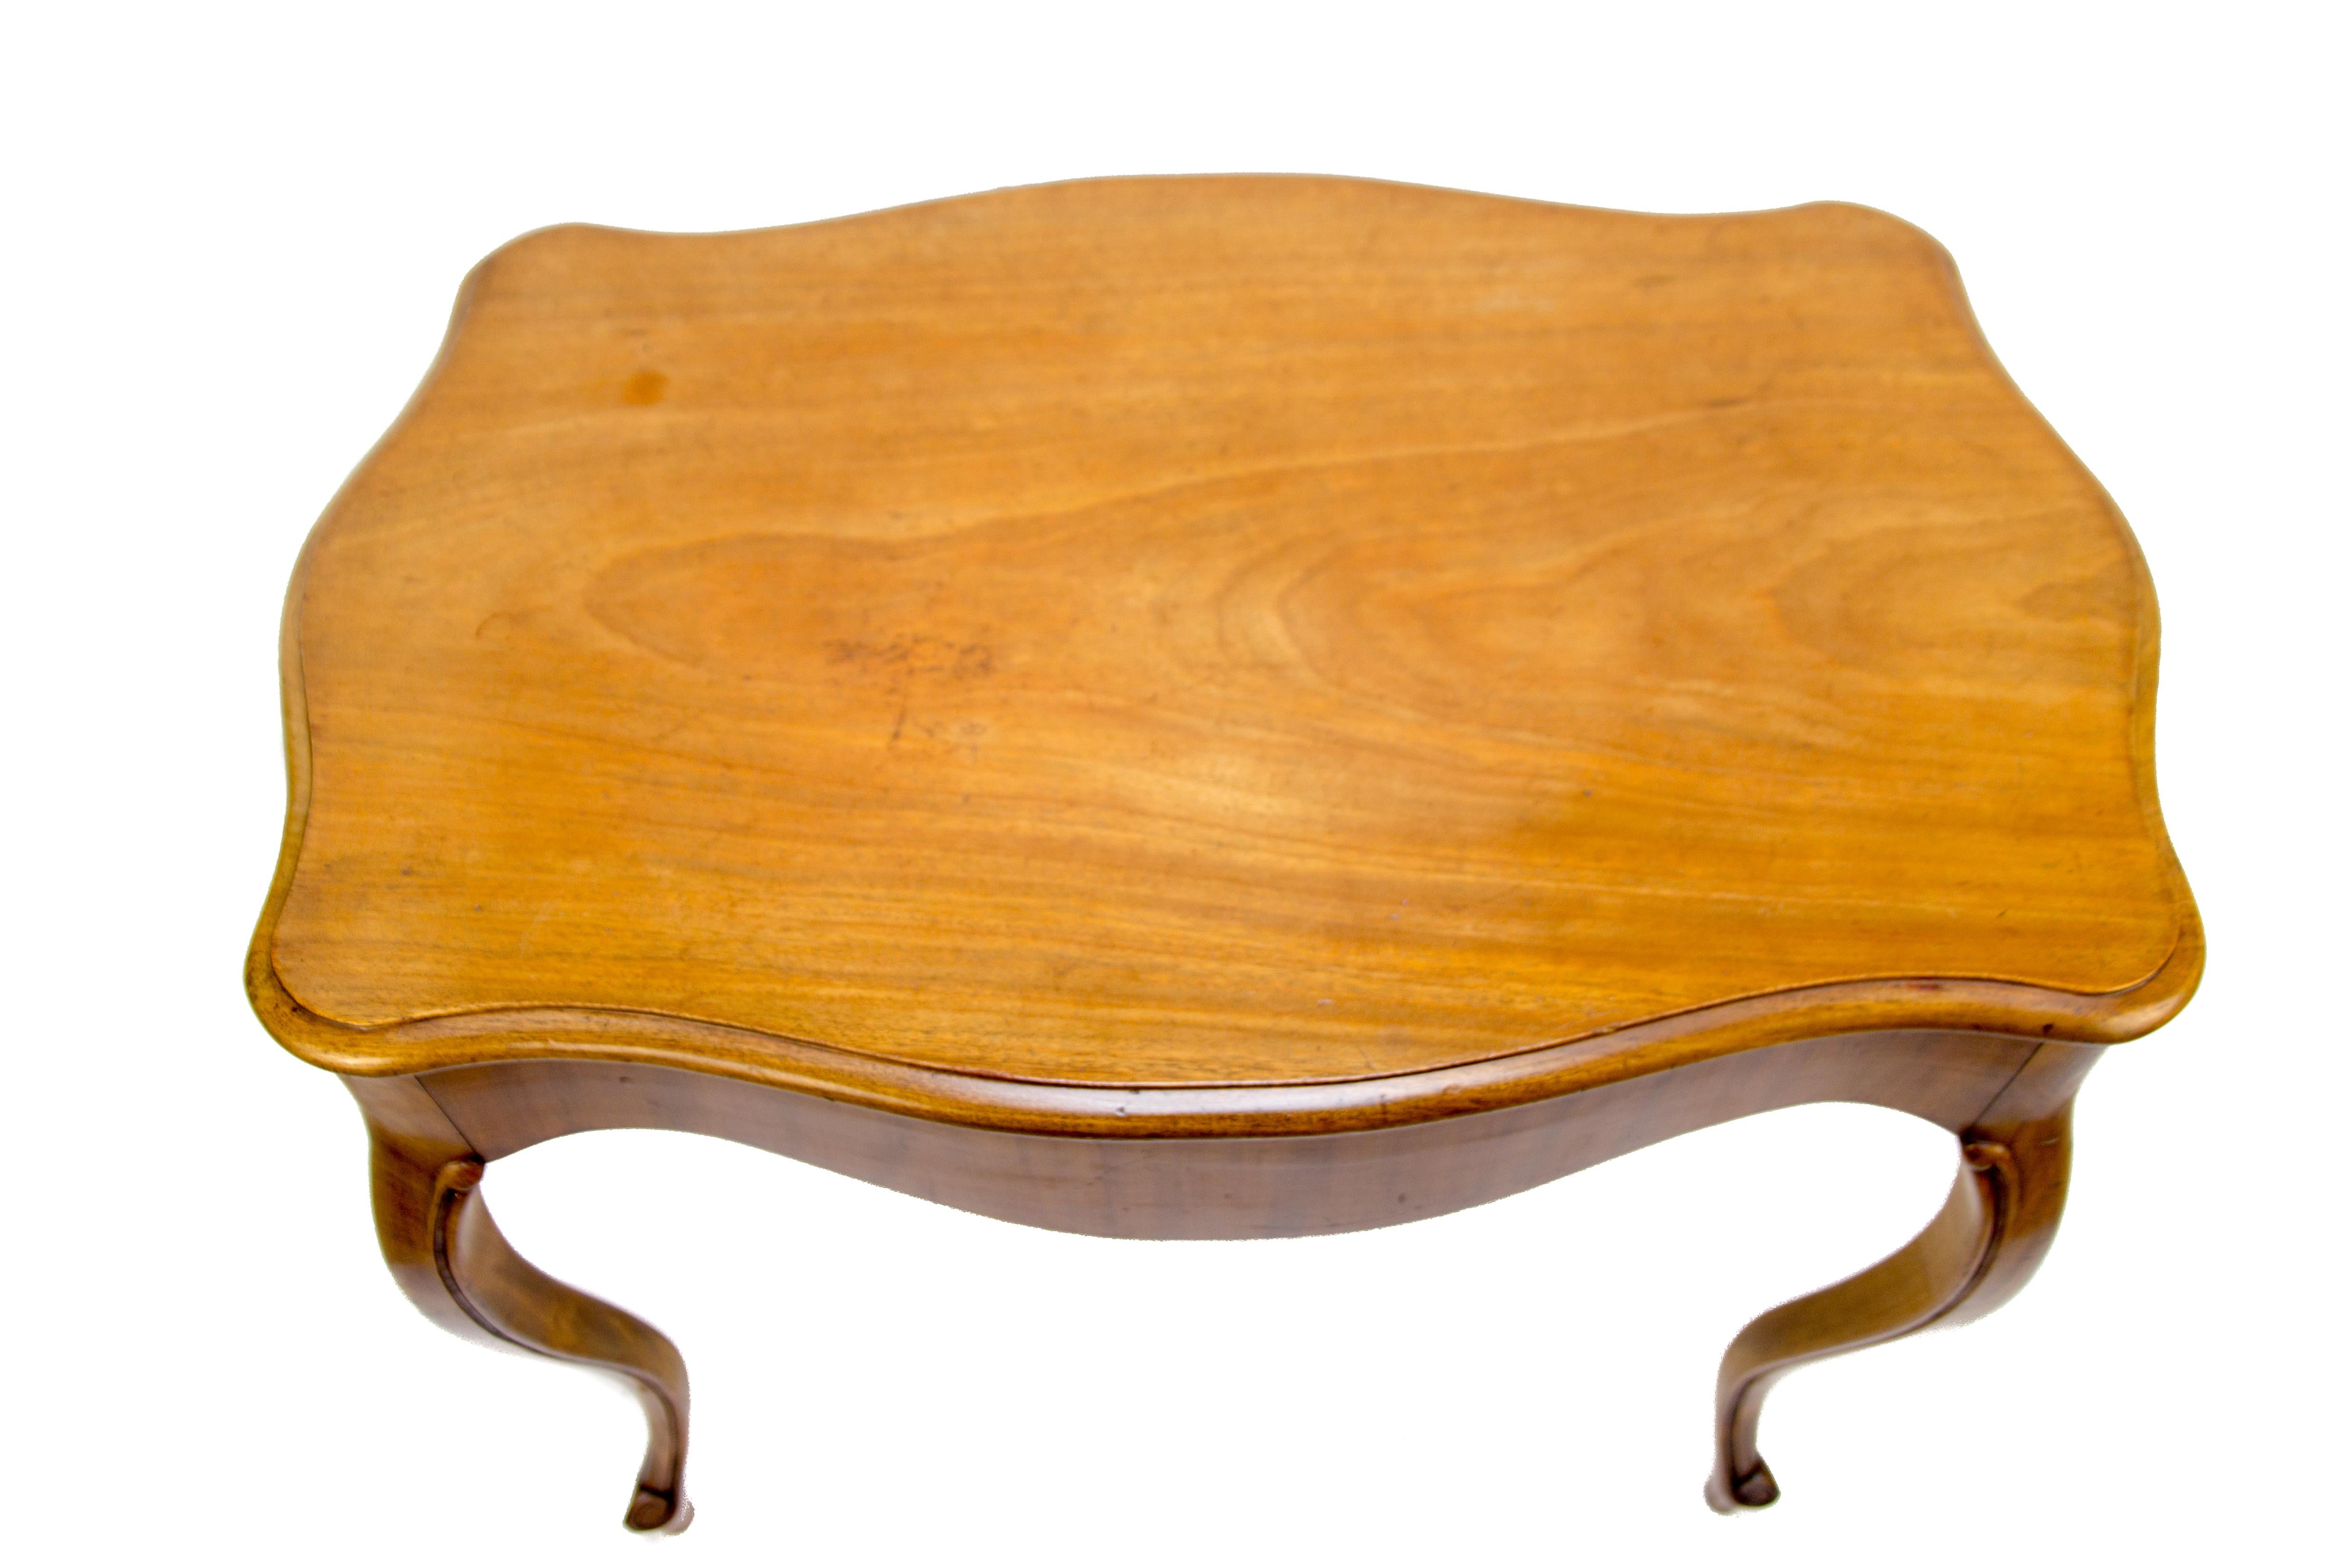 French Louis XV style table, made of walnut in the 1930s.
Dimensions:
Height 79 cm / 31.1 in; width 61 cm / 24.01 in; length 91 cm / 35.82 in.
 